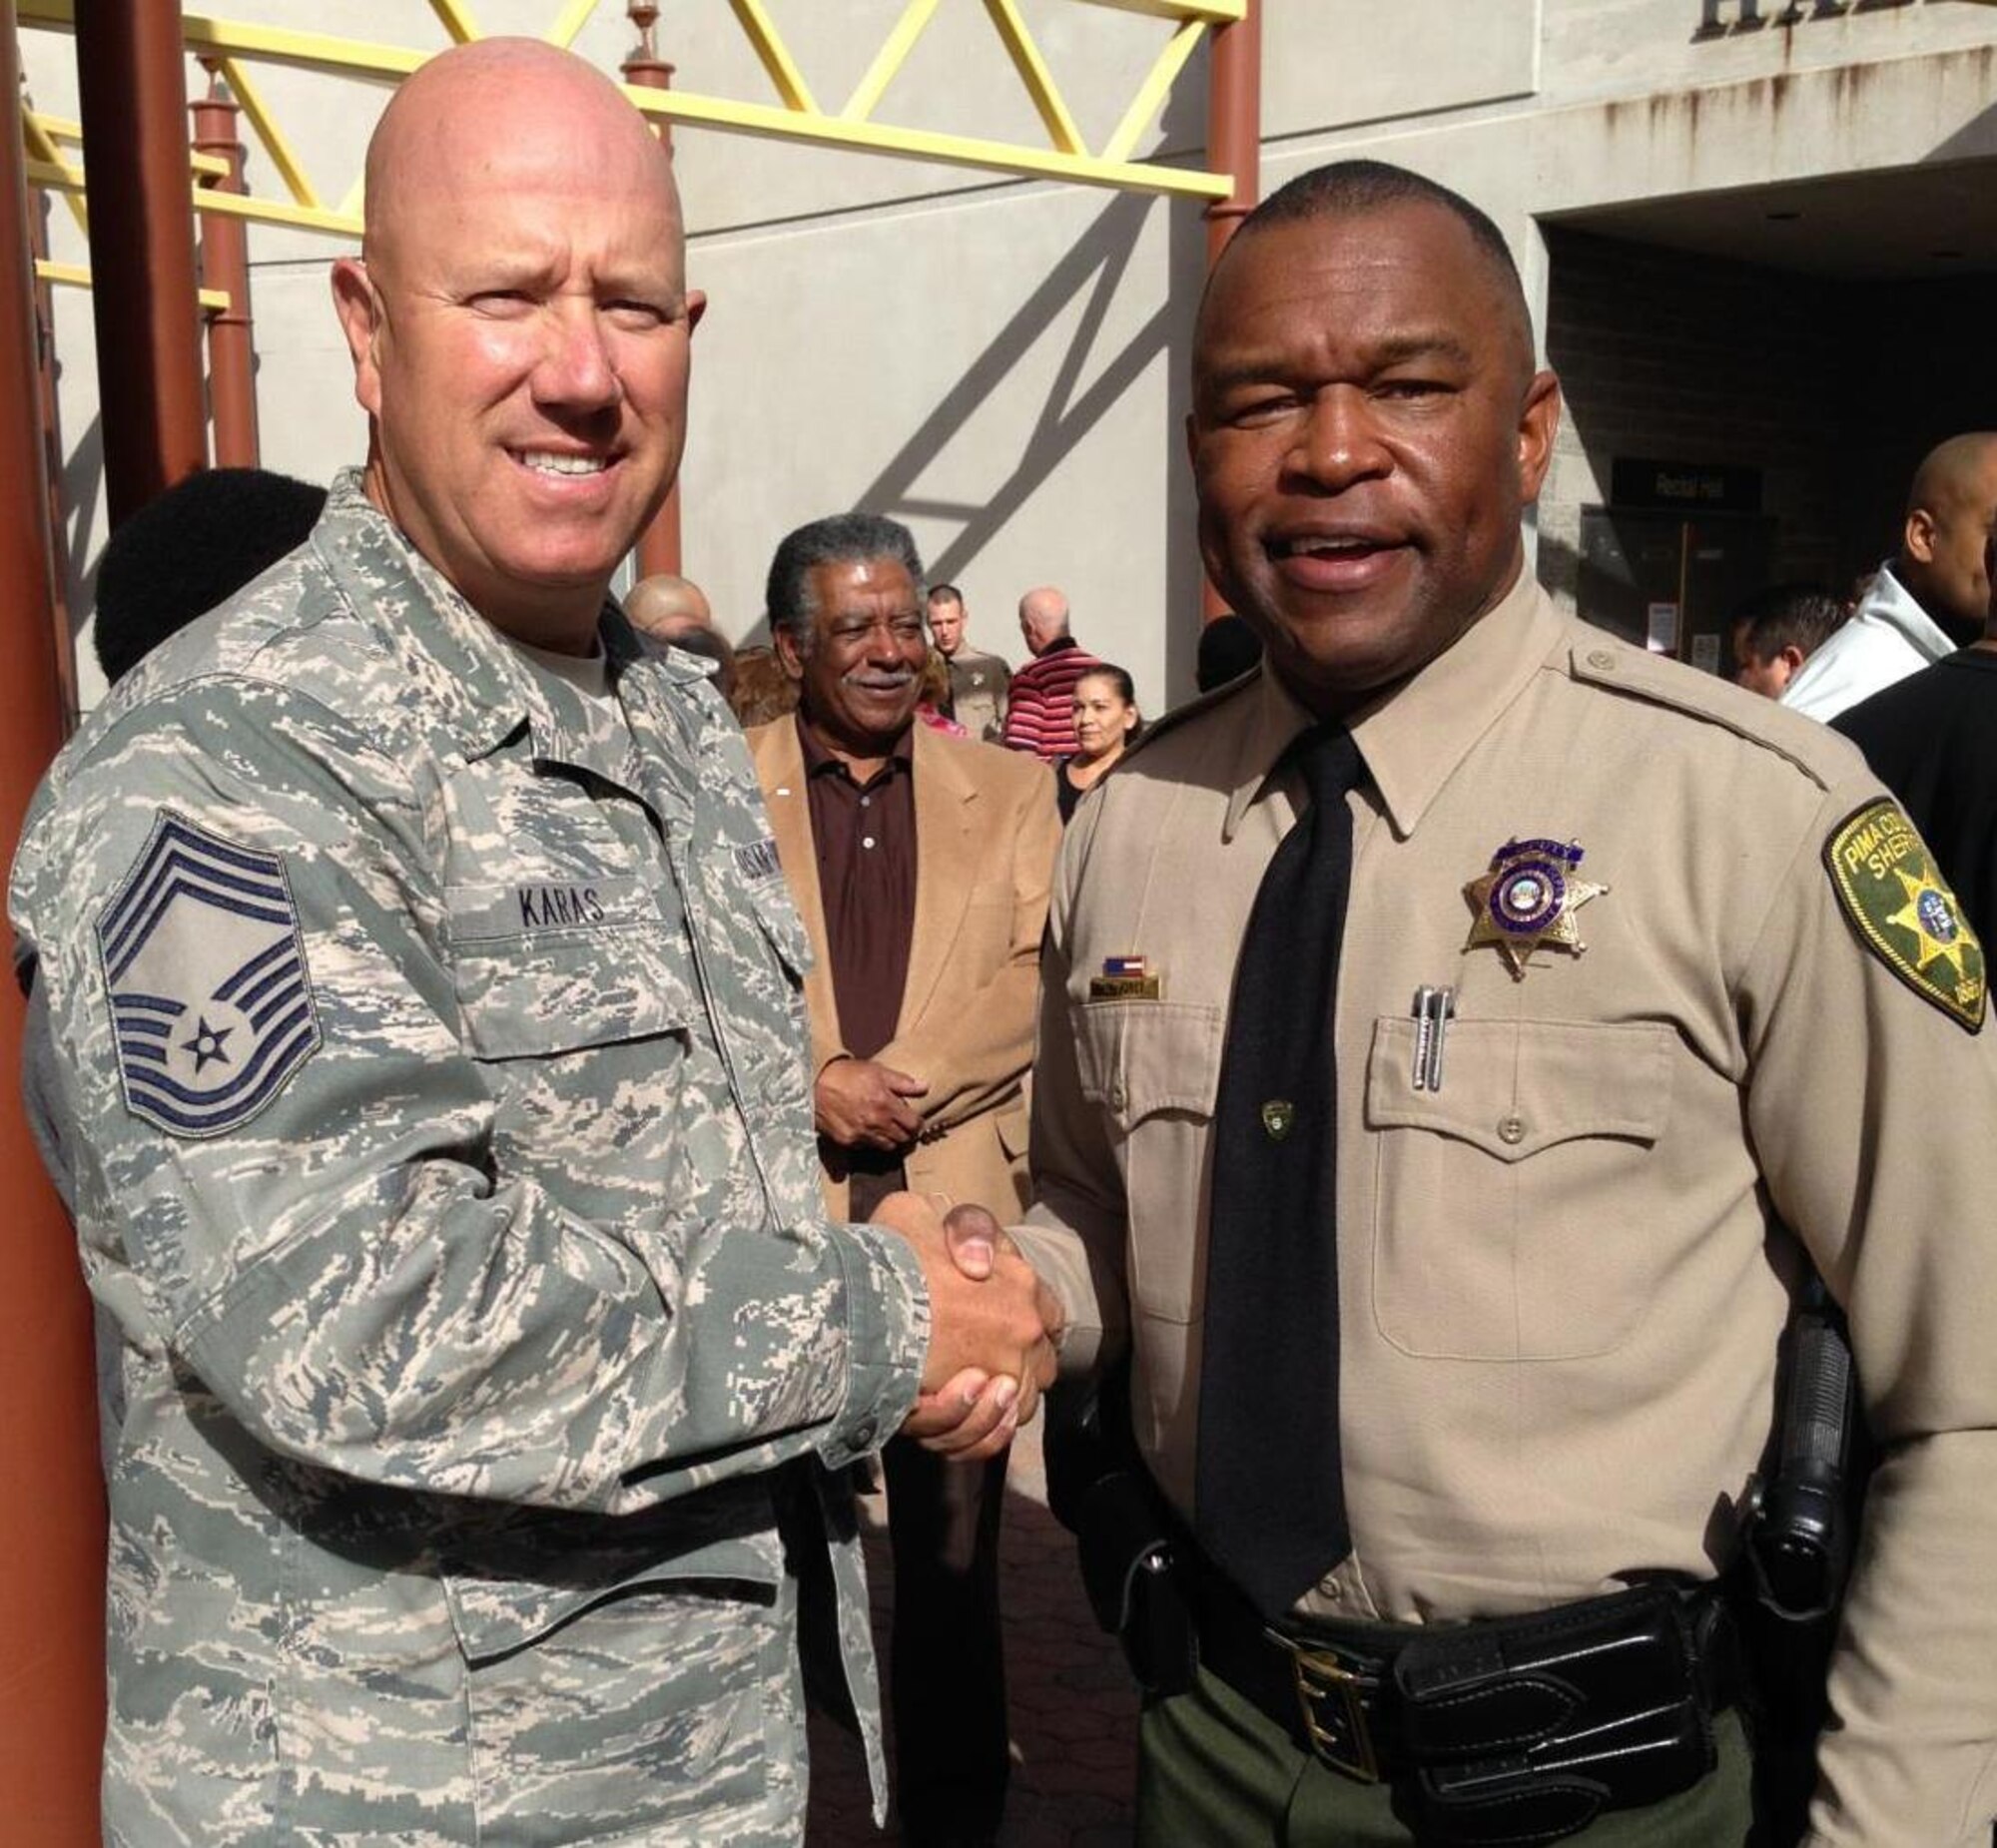 Chief Master Sgt. Brian Karas congratulates Master Sgt. Wendell Jones for graduating from the Sheriff’s Department Academy Jan. 24.  Jones has dedicated himself to serve the Tucson community as both a sheriff and Air Guardsman. (Courtesy Photo)